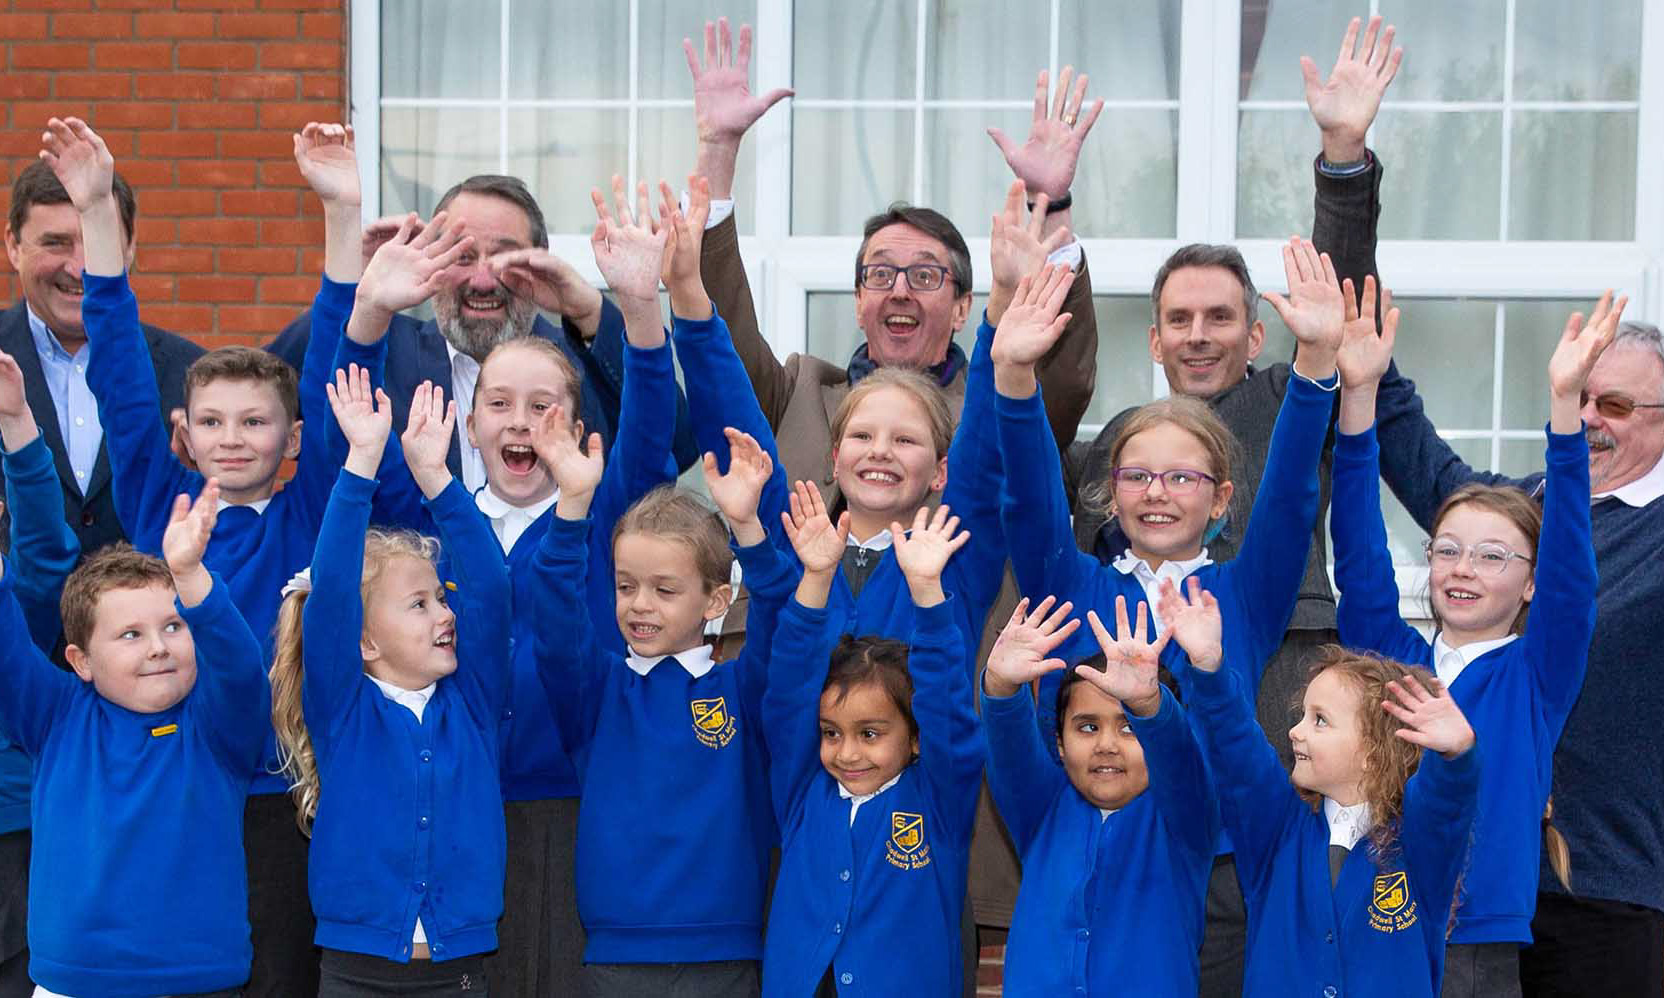 Chadwell St Mary Primary School celebrates with Paul Tarrant (back row centre) and Royal Arch Masons